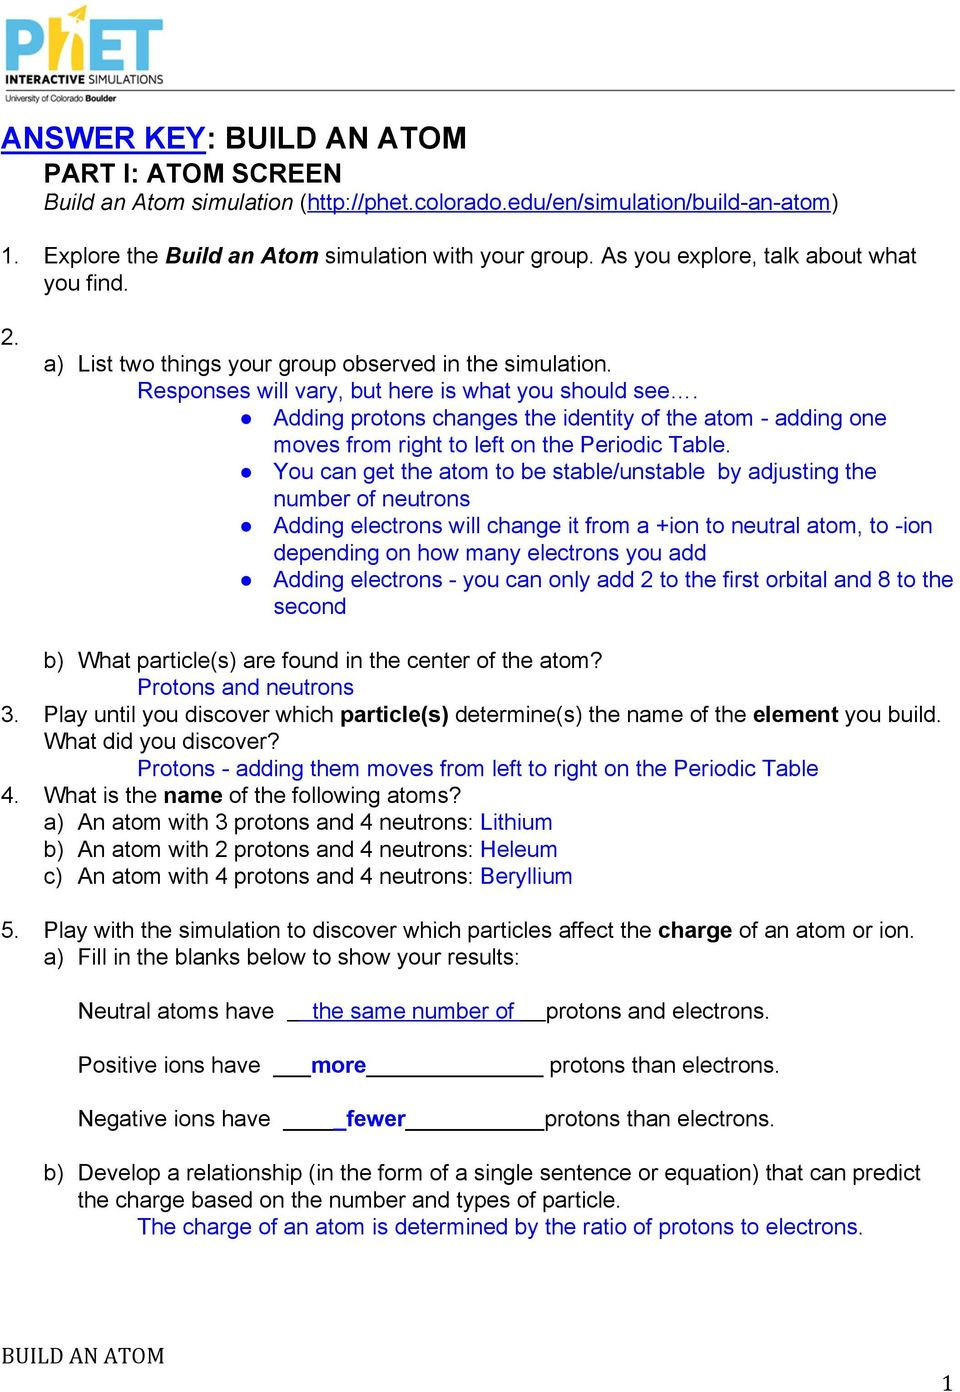 Atoms and isotopes Worksheet Answers Answer Key Build An atom Part I atom Screen Build An atom